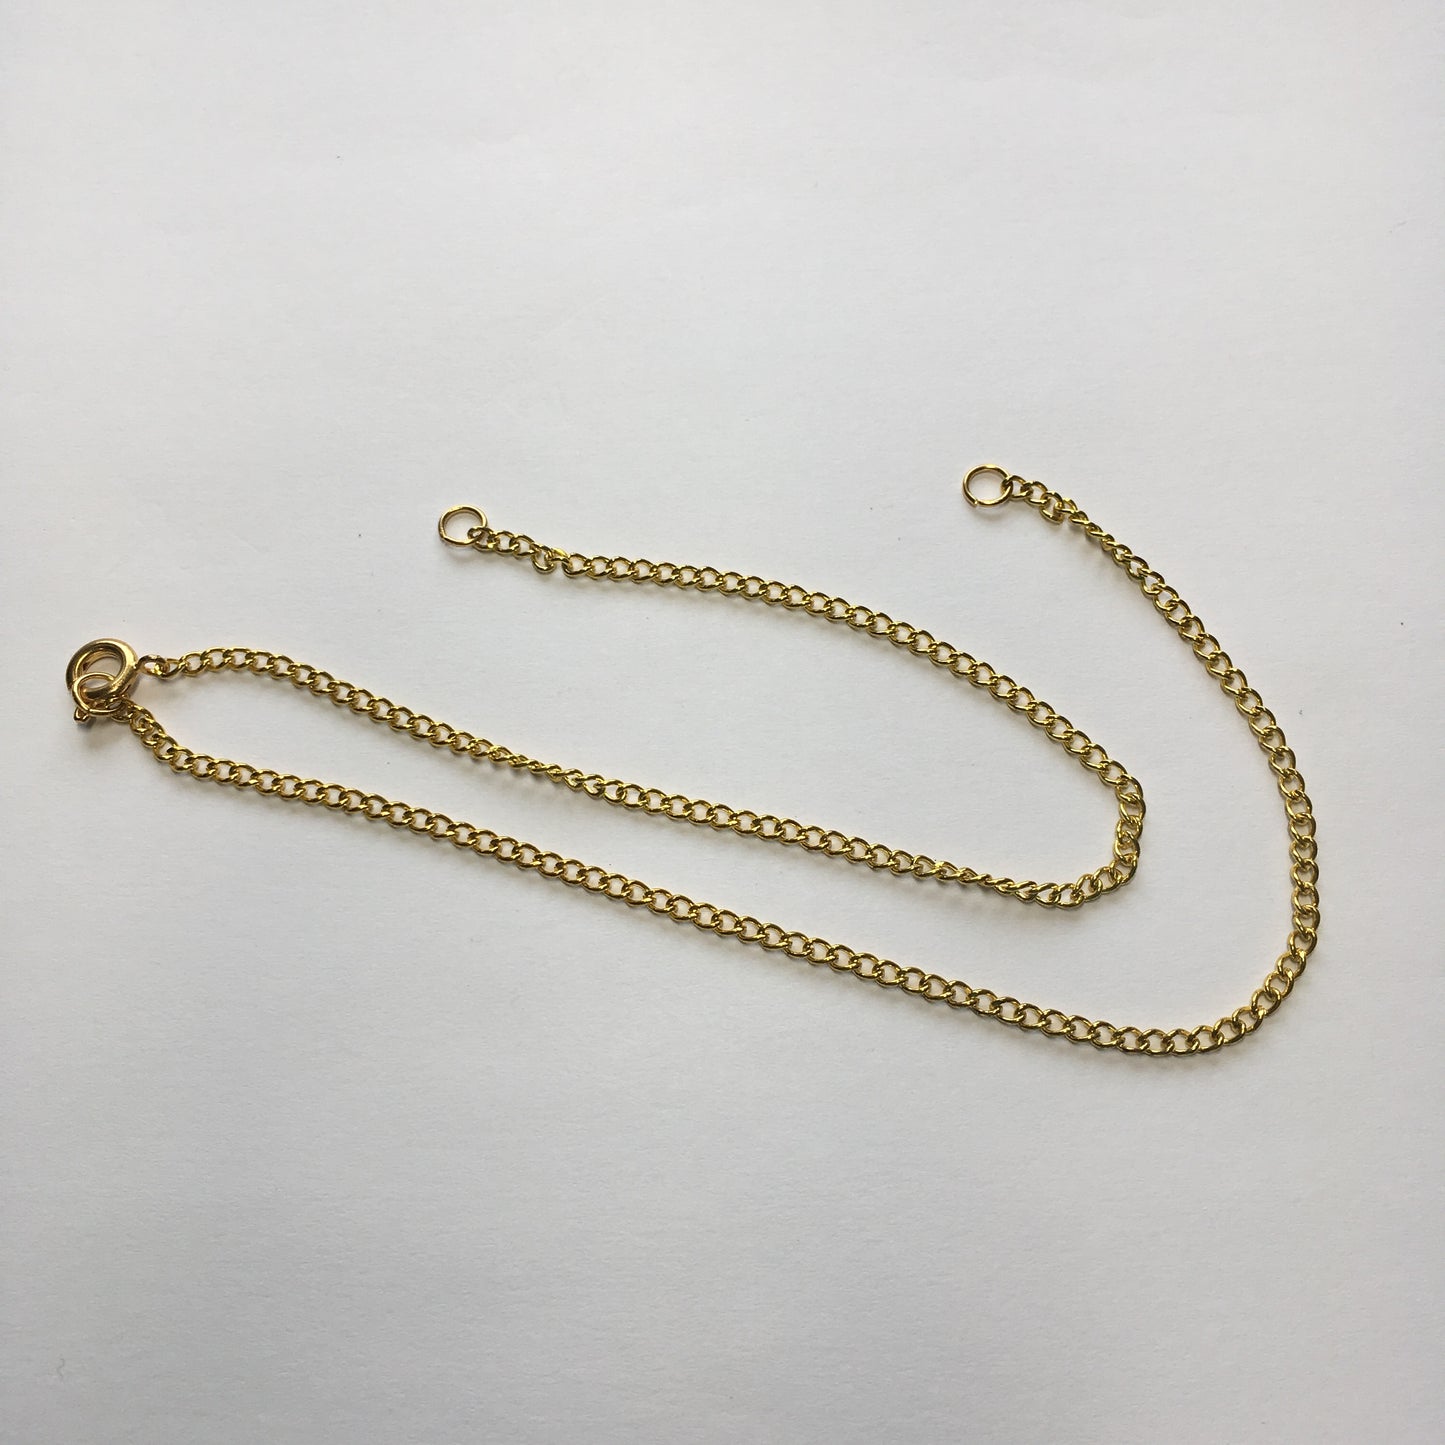 Split Gold Chain, 12-Inch Chain, Lobster Claw Clasp with 6-Inch On Each Side of Clasp